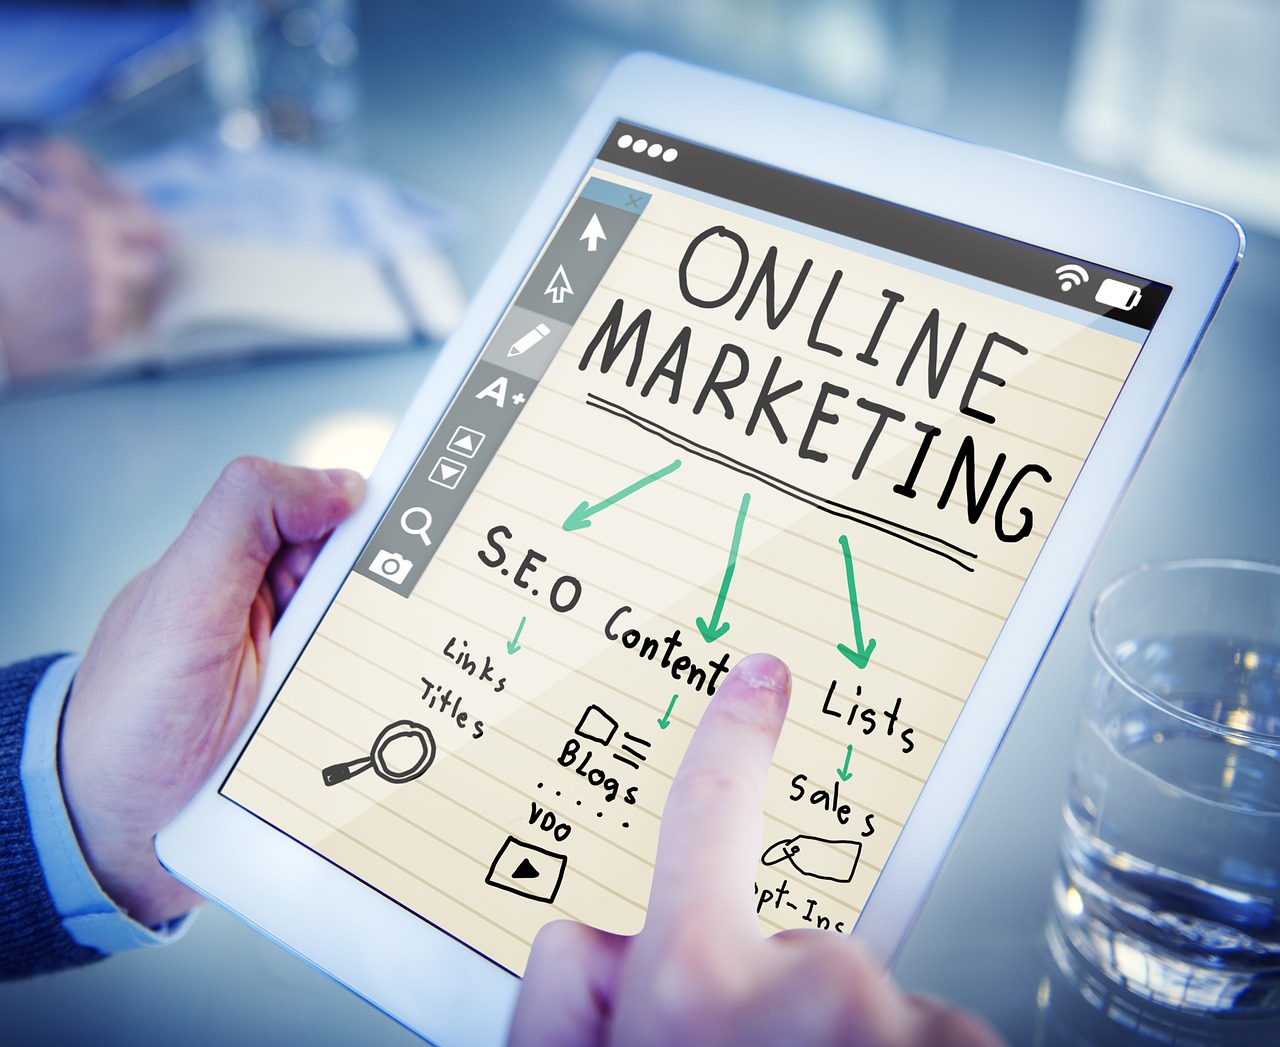 Top 8 Trends That Make You Choose Online Marketing in 2020